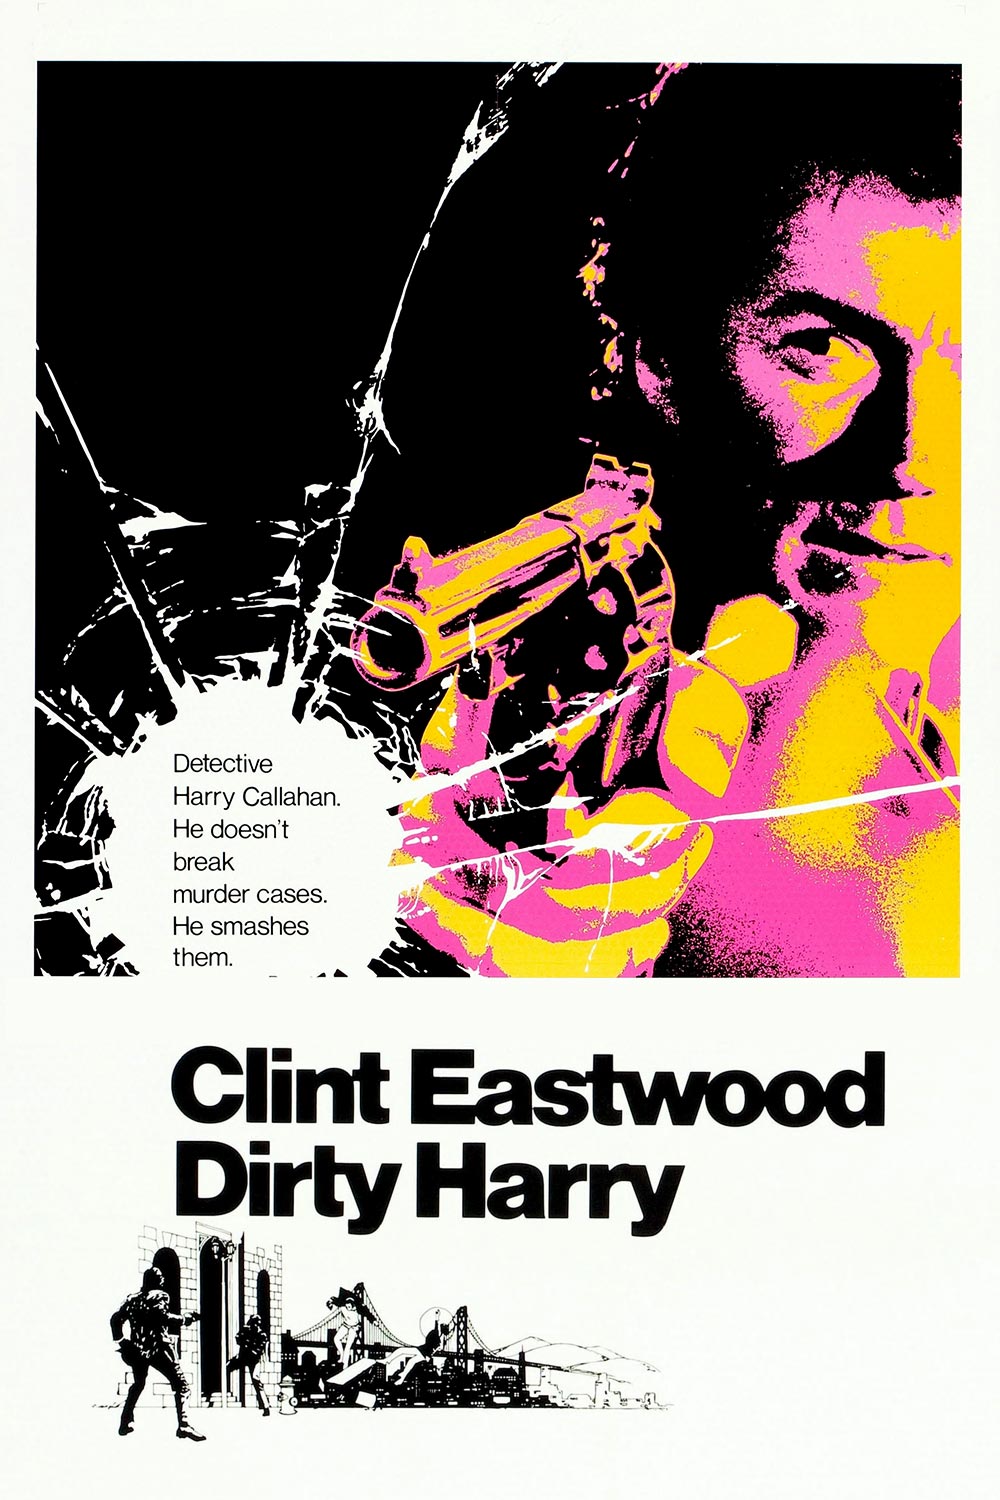 Dirty Harry (1971) poster